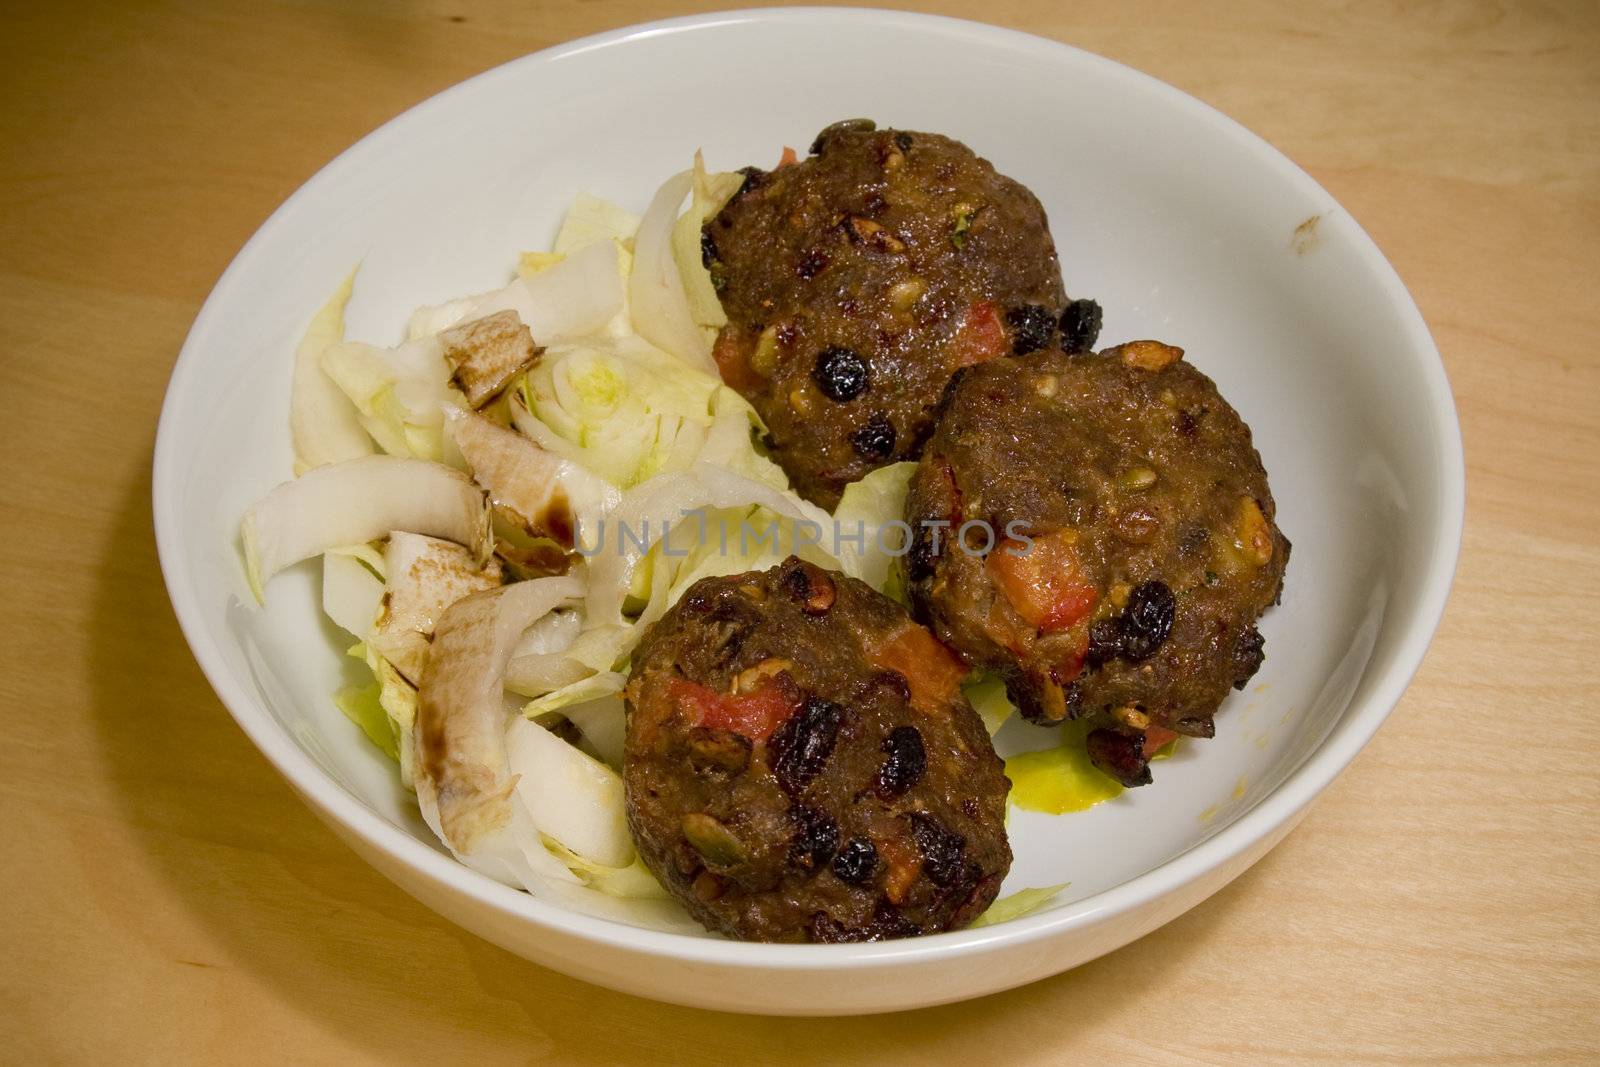 Meat balls on a bed of endives